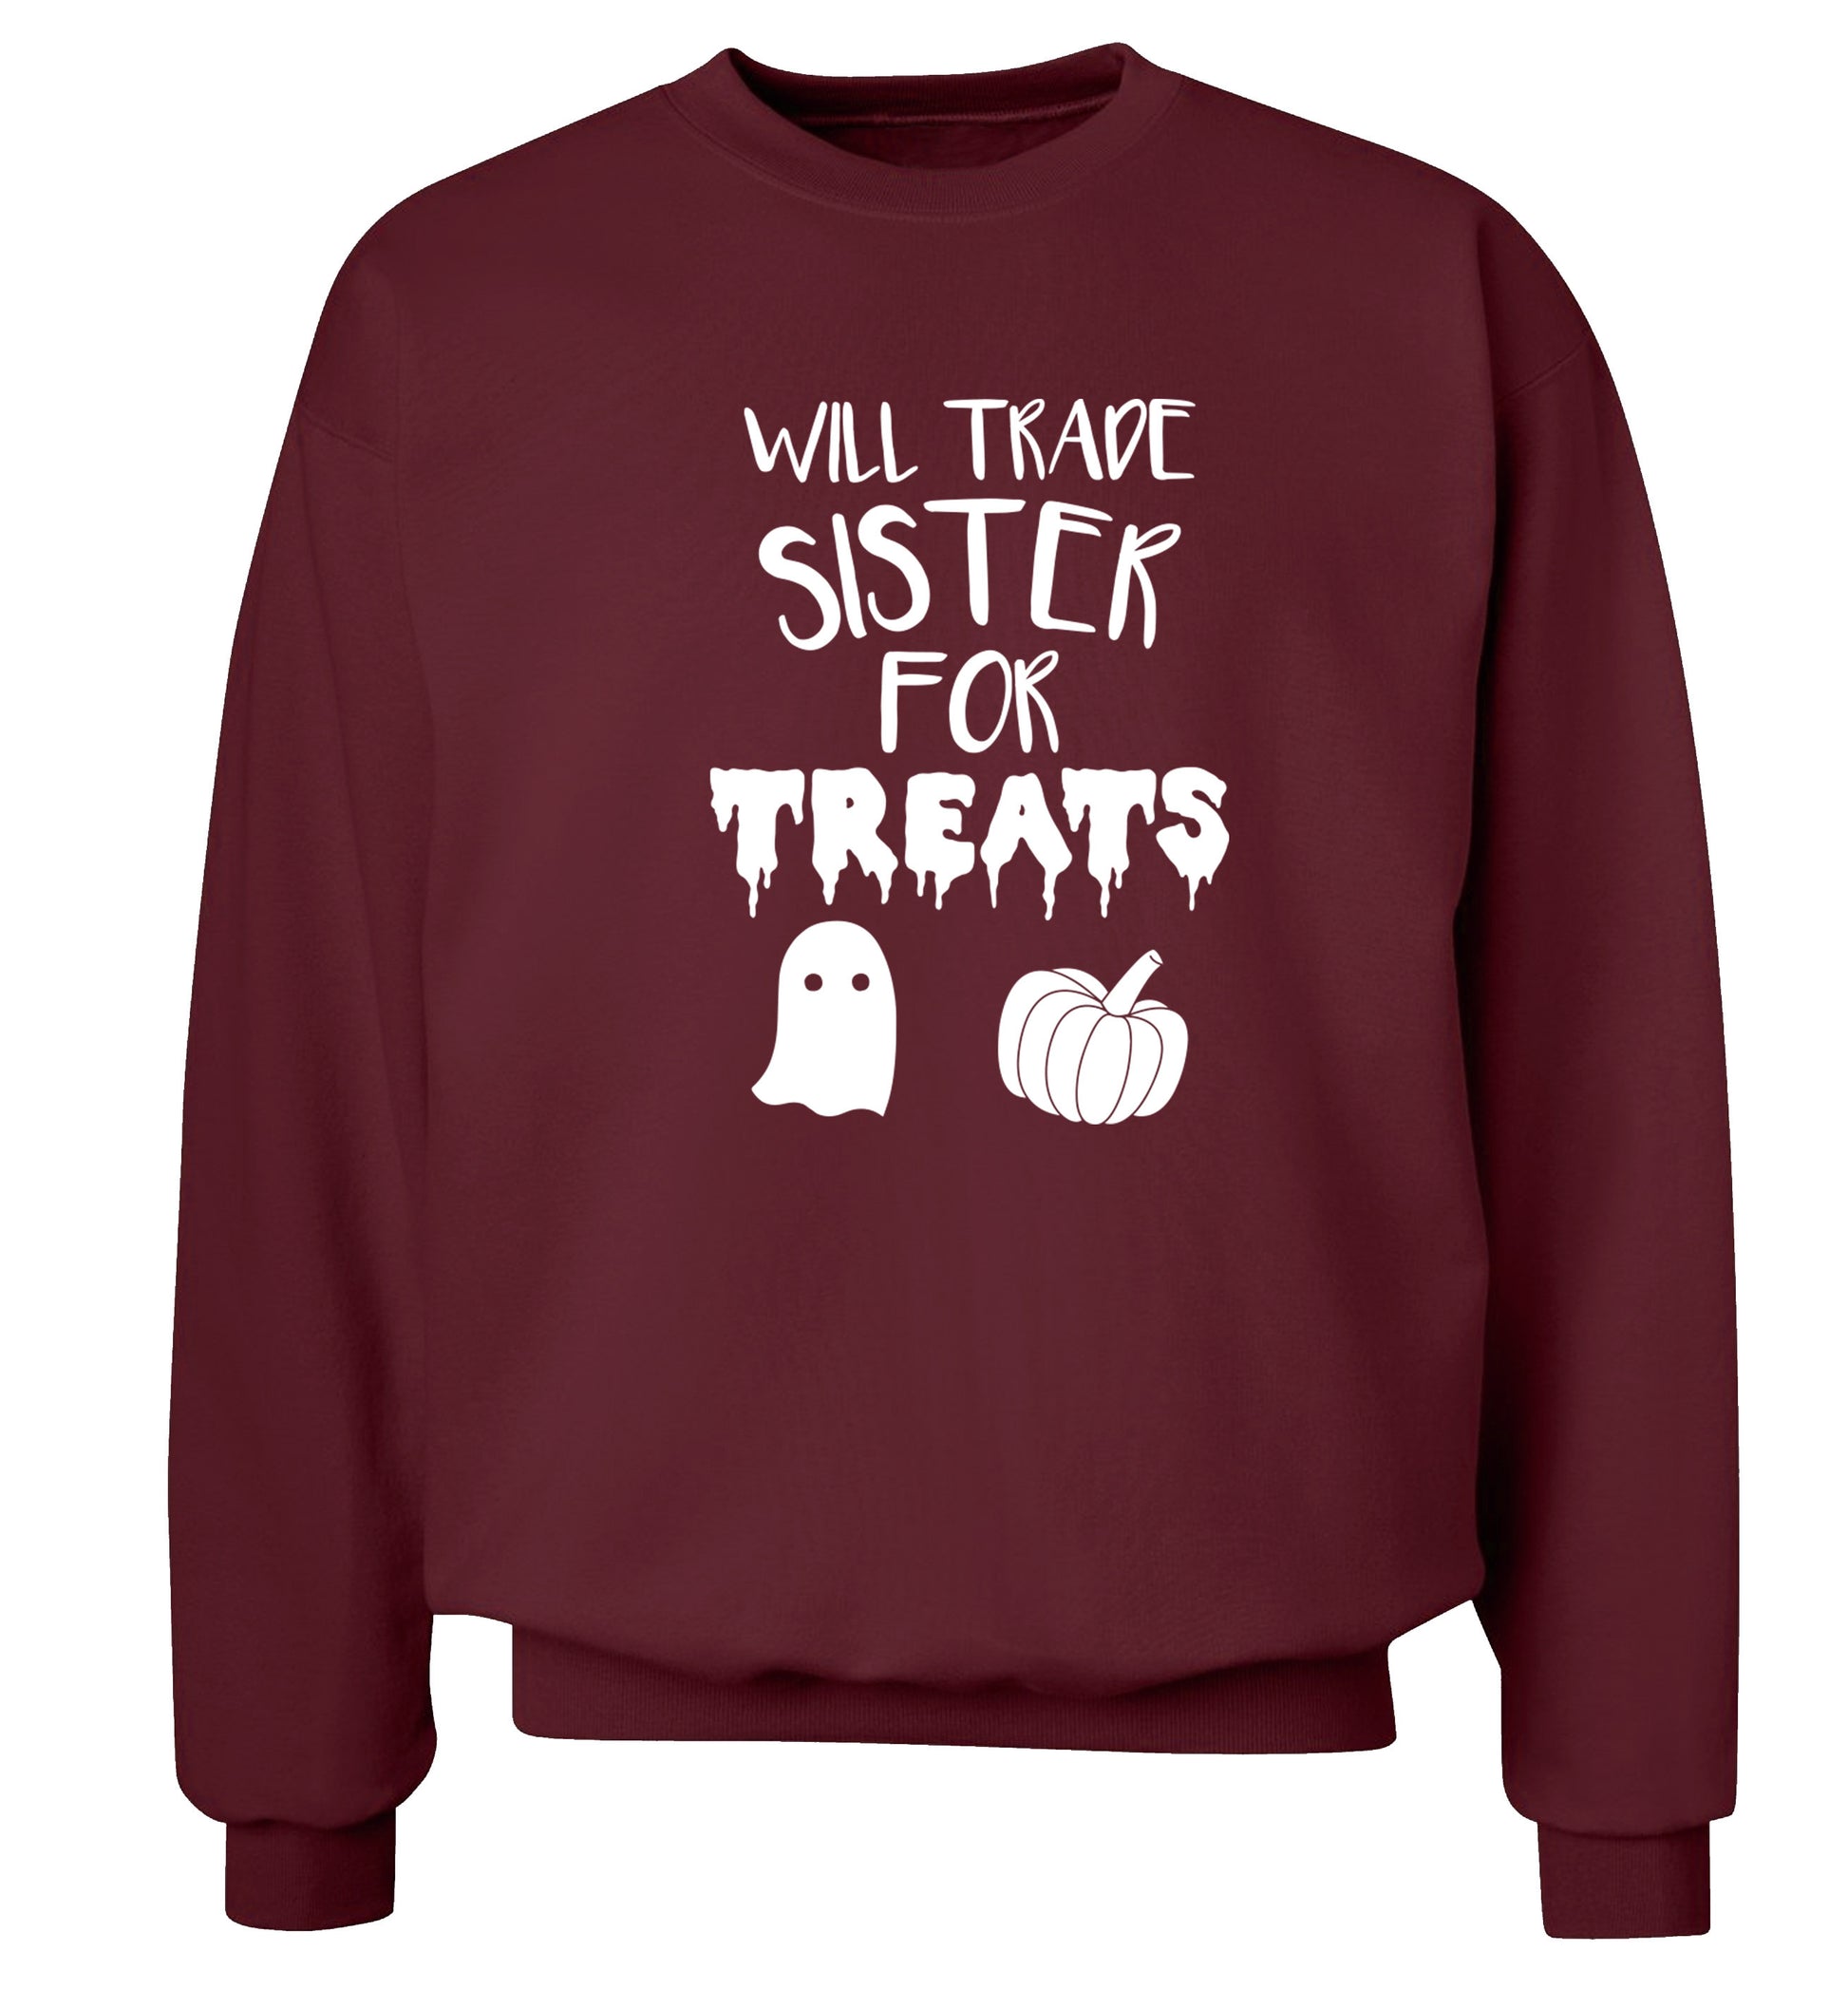 Will trade sister for treats Adult's unisex maroon Sweater 2XL